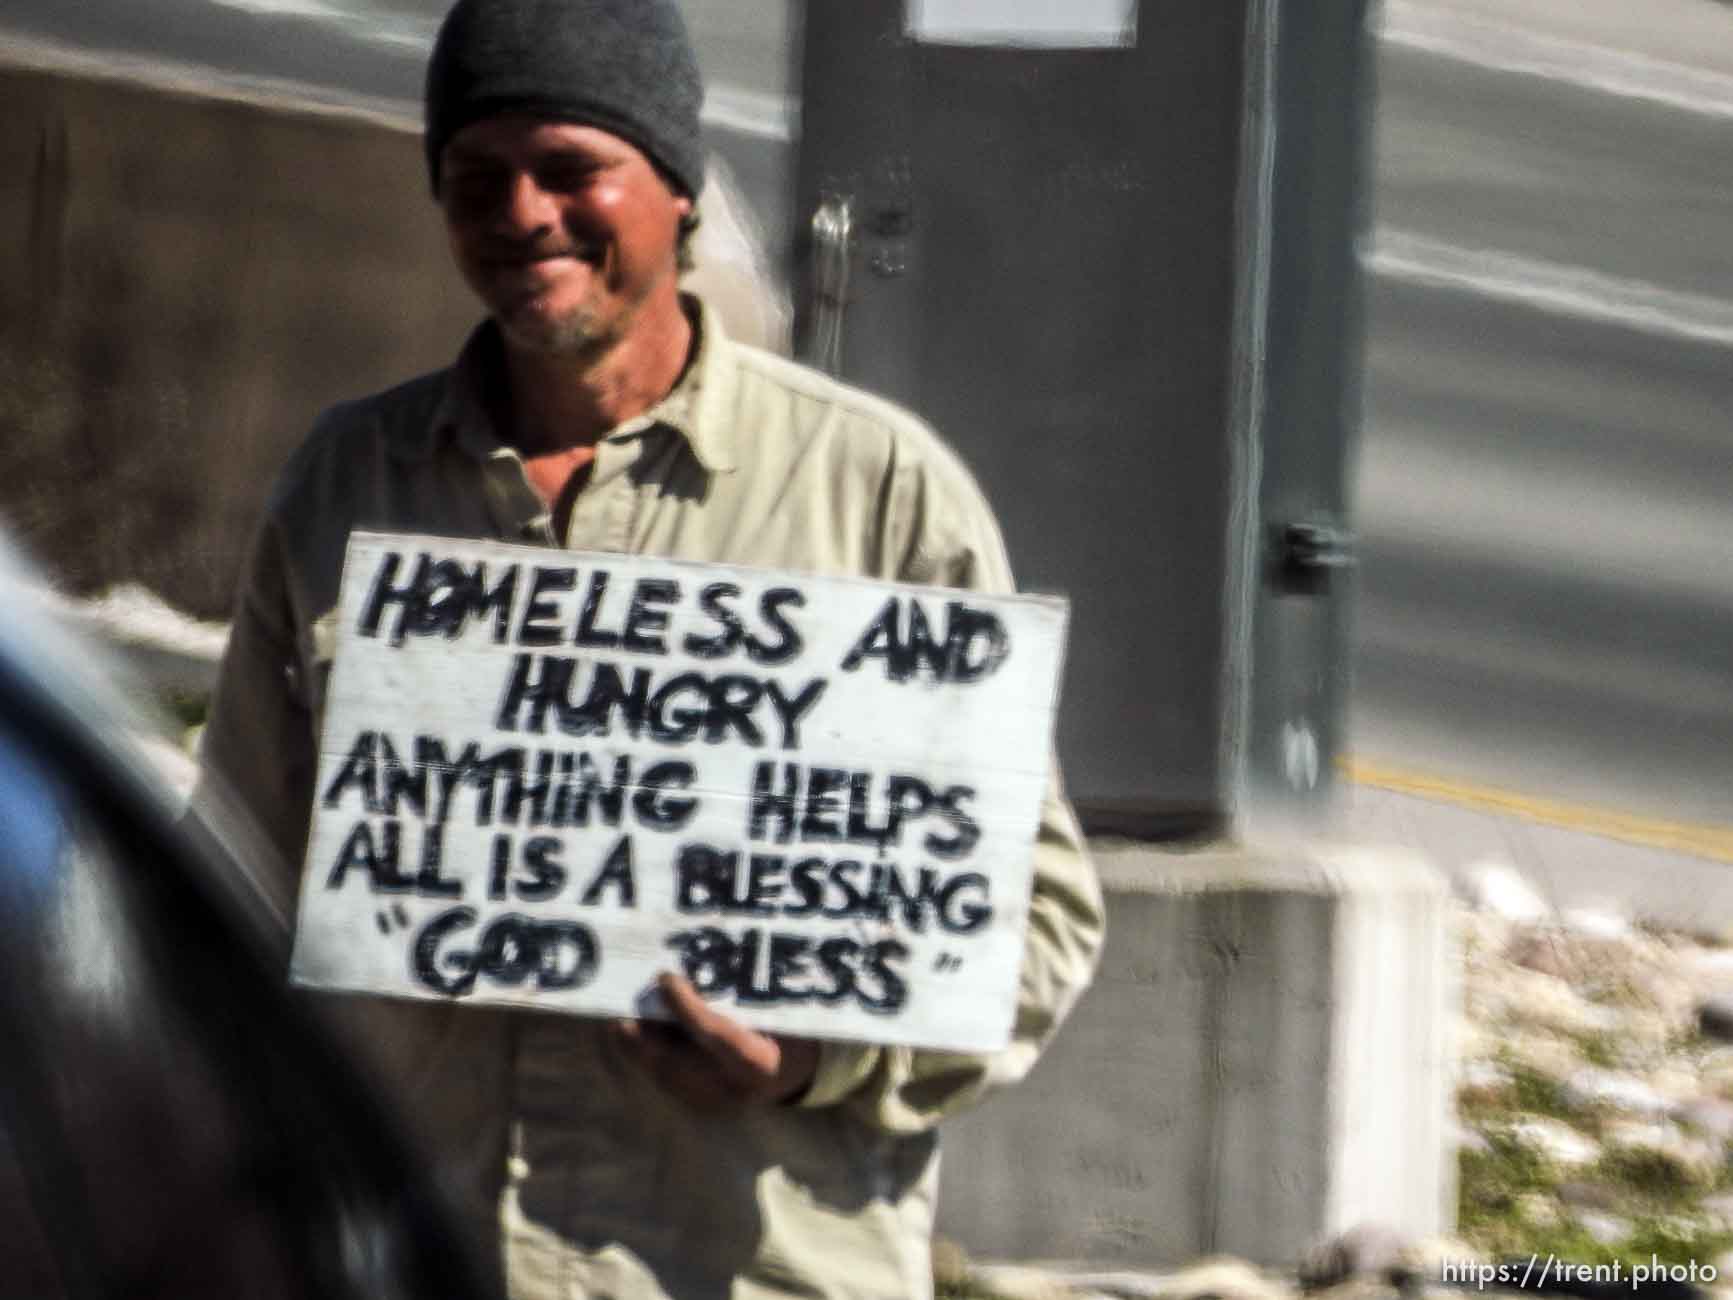 Homeless and Hungry